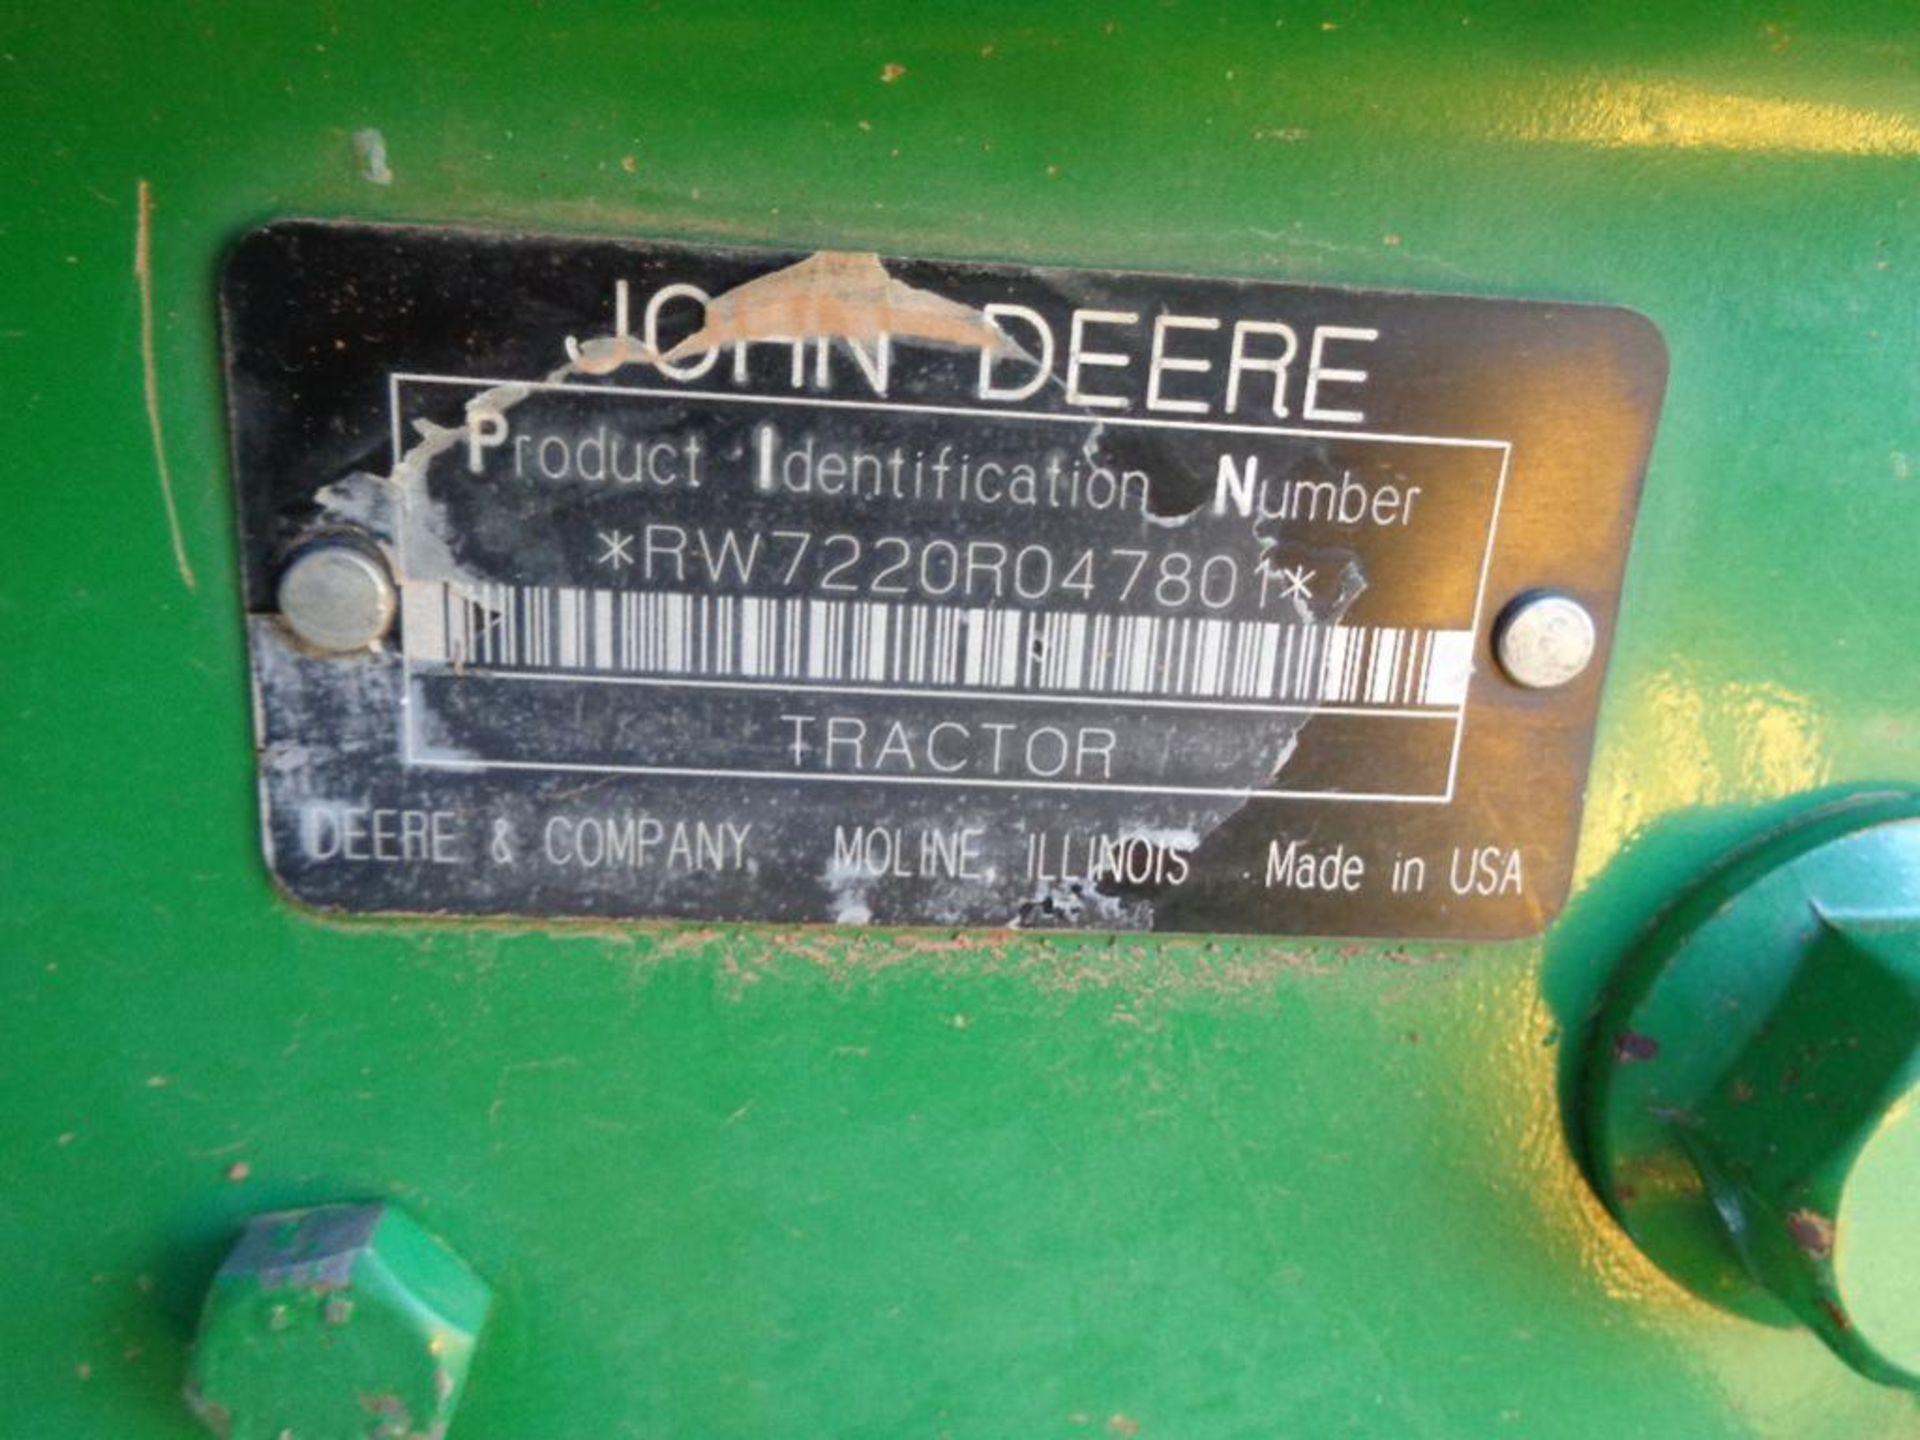 2006 John Deere 7220 MFWD Farm Tractor s/n r047801 Cab,a/c,3pt,hyd outlets - Image 3 of 4